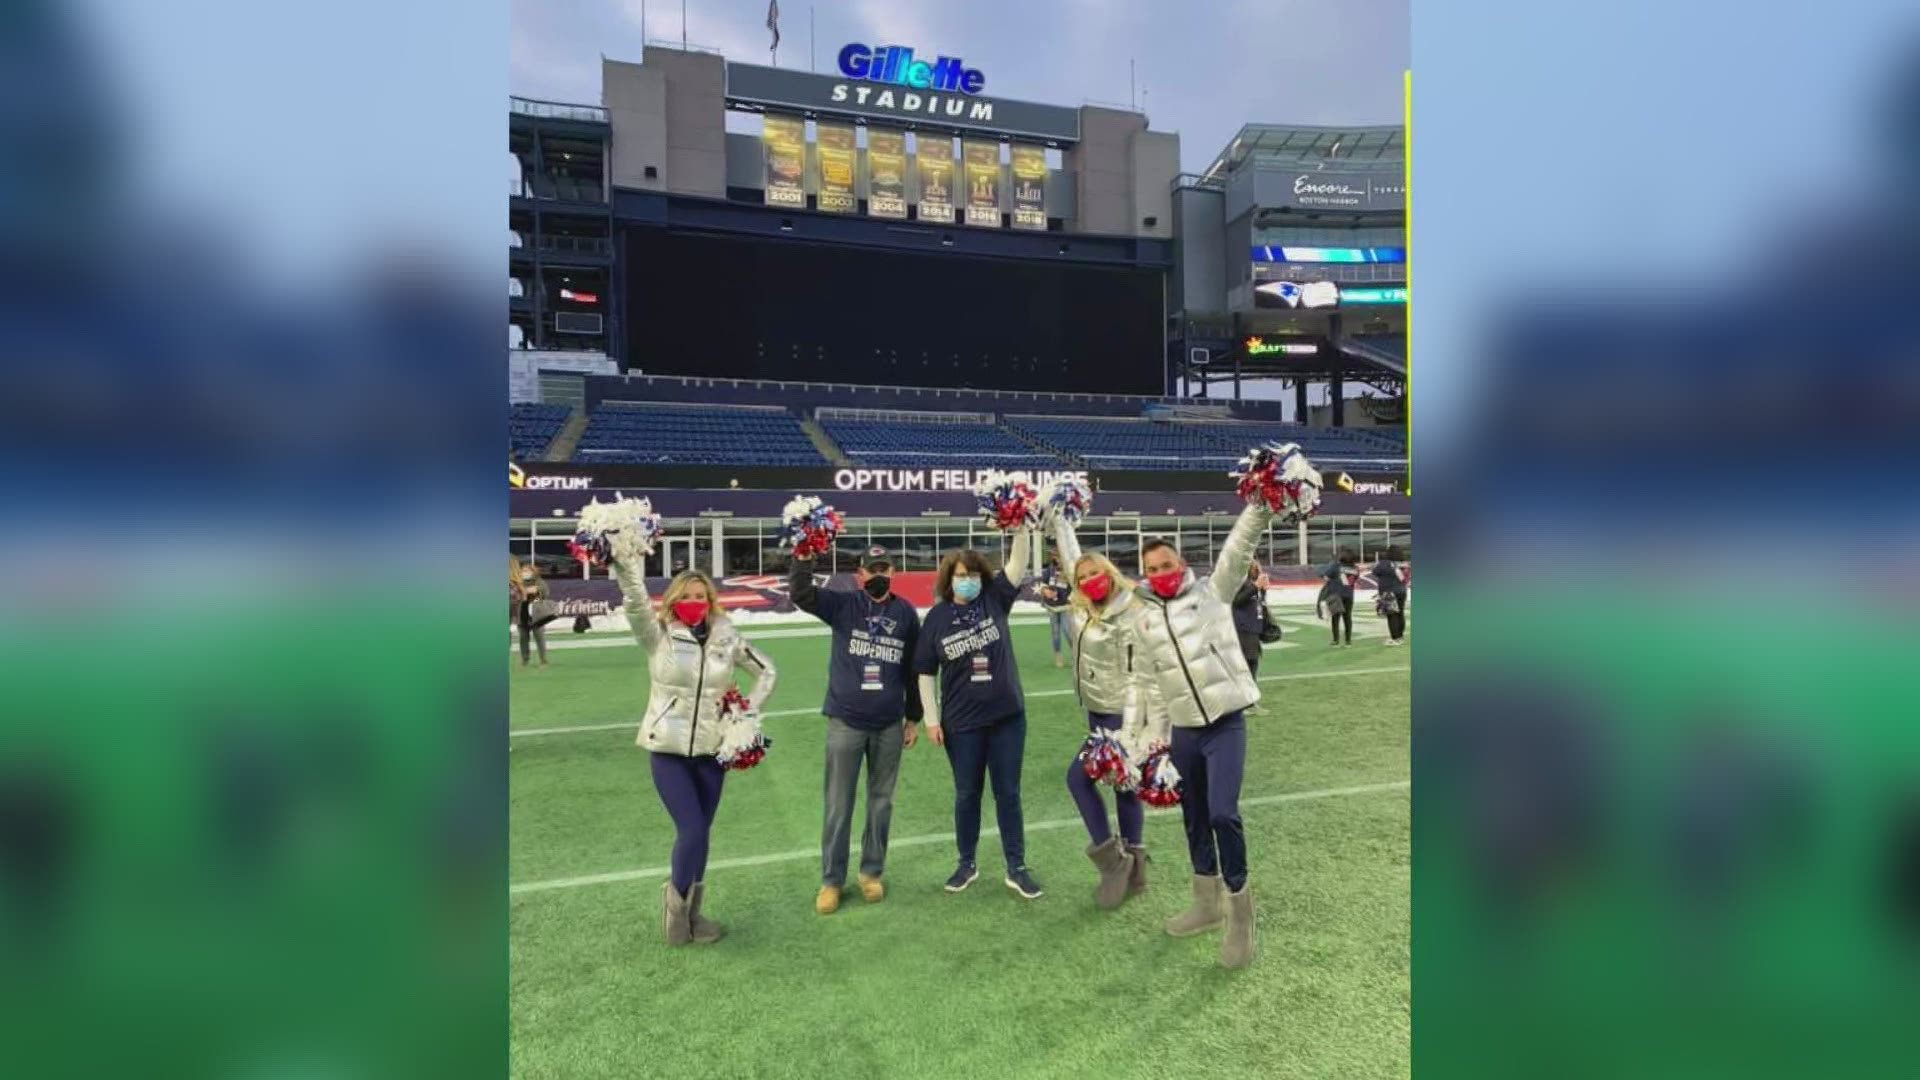 Four lucky Maine health care workers are settling in at the Raymond James Stadium in Tampa Bay, ready for the Super Bowl kick-off.